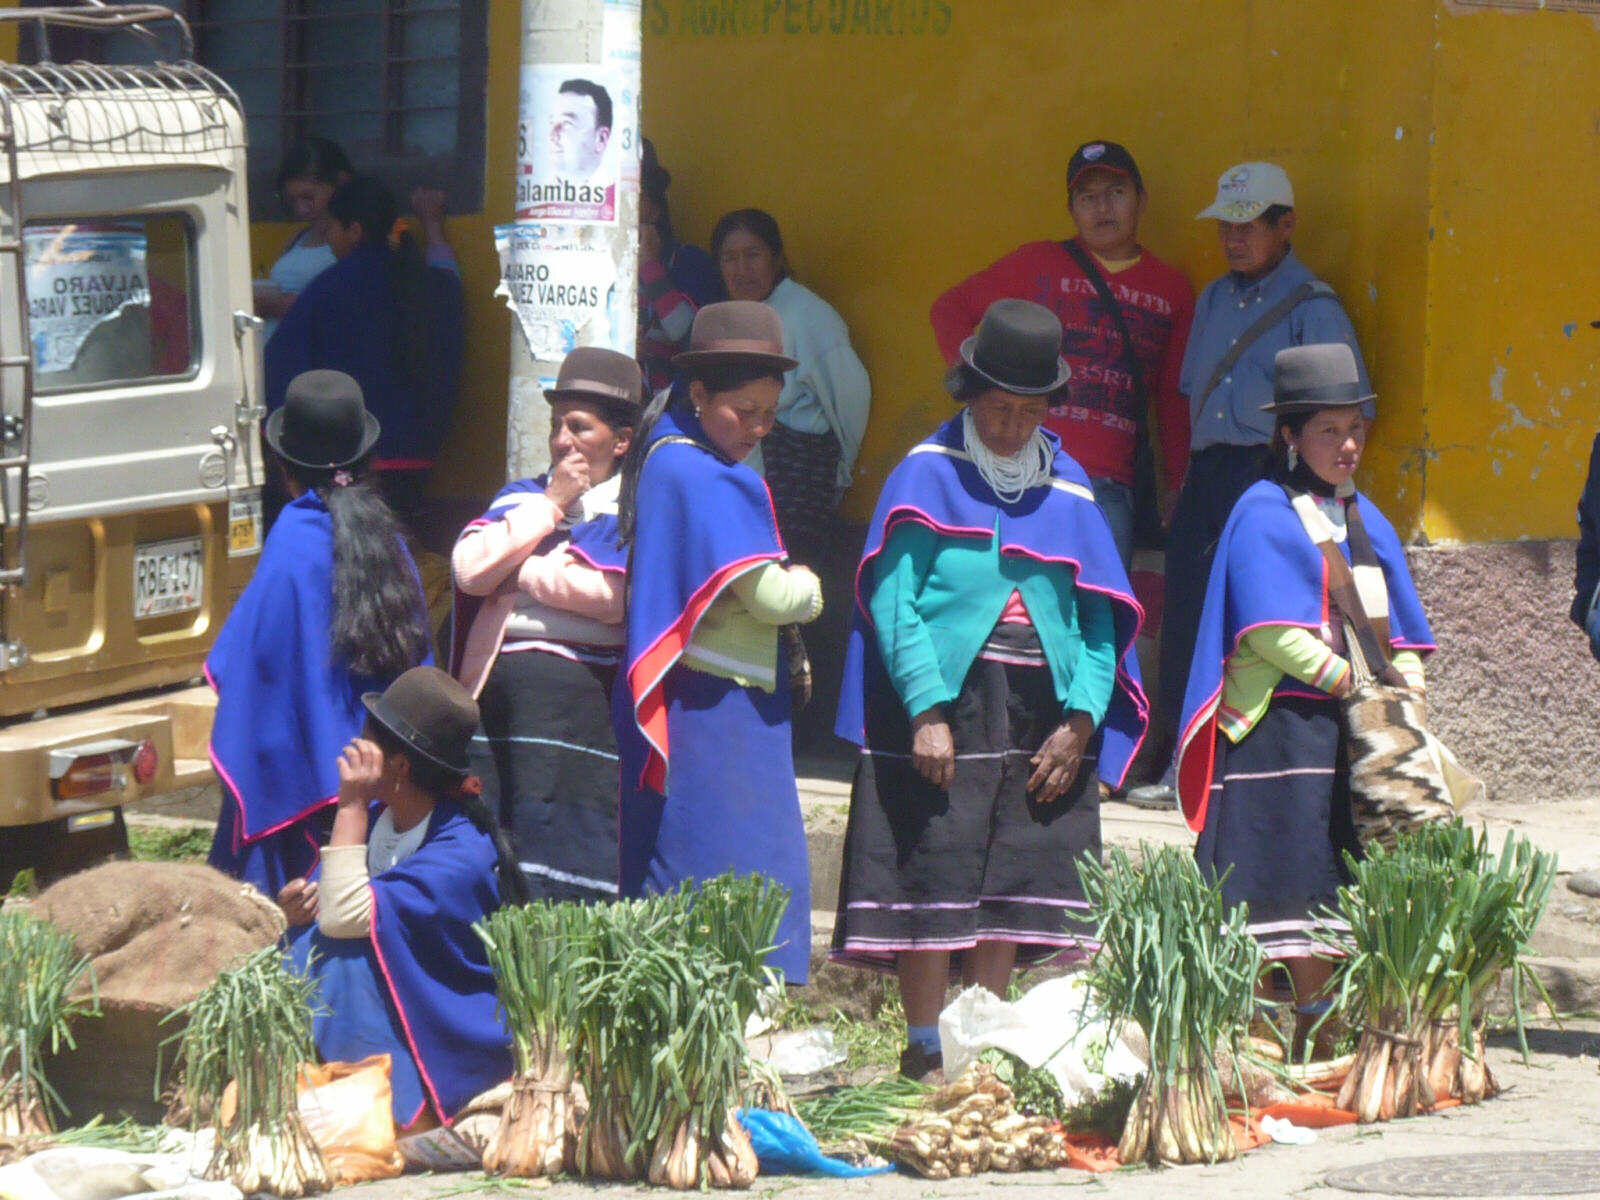 Onion sellers in Silvia indigenous market, Colombia